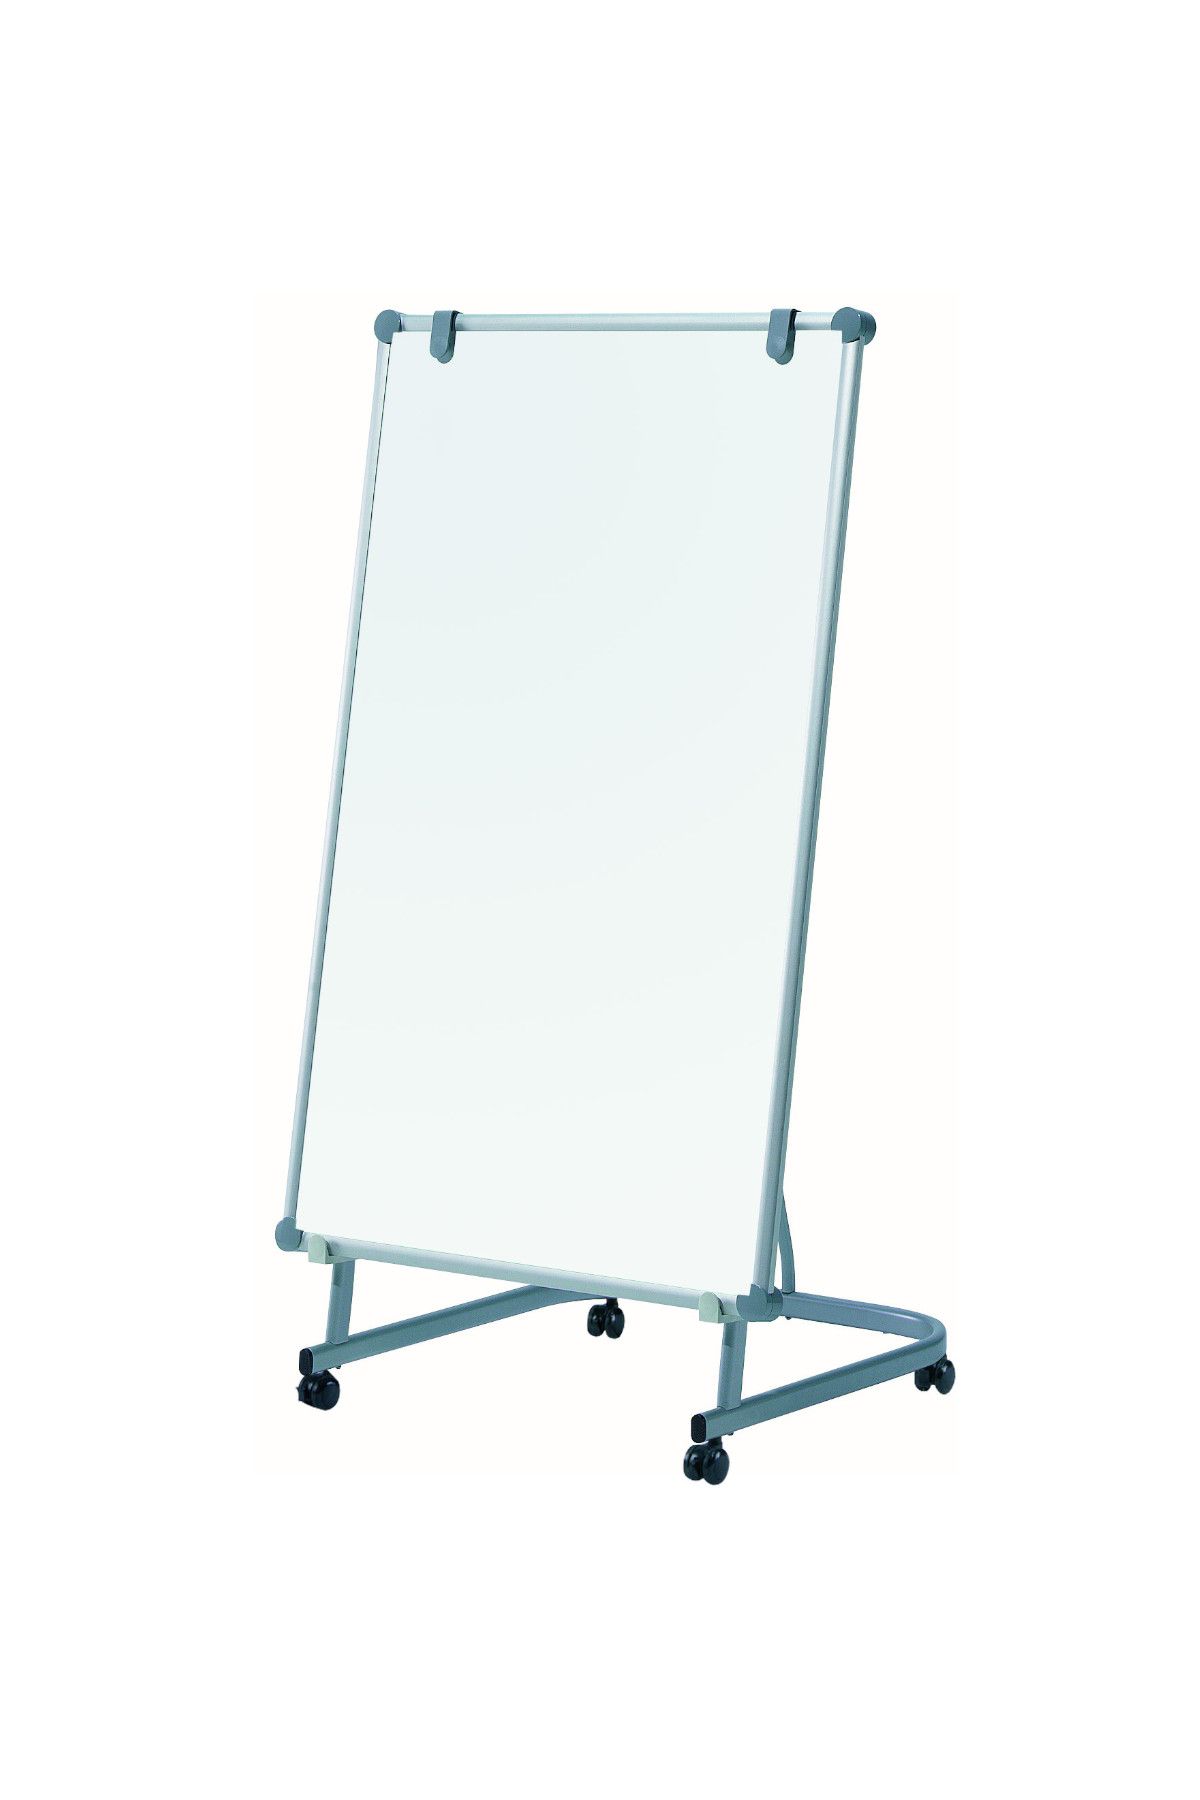 Mobiles Whiteboard MAULpro, 120x75 cm